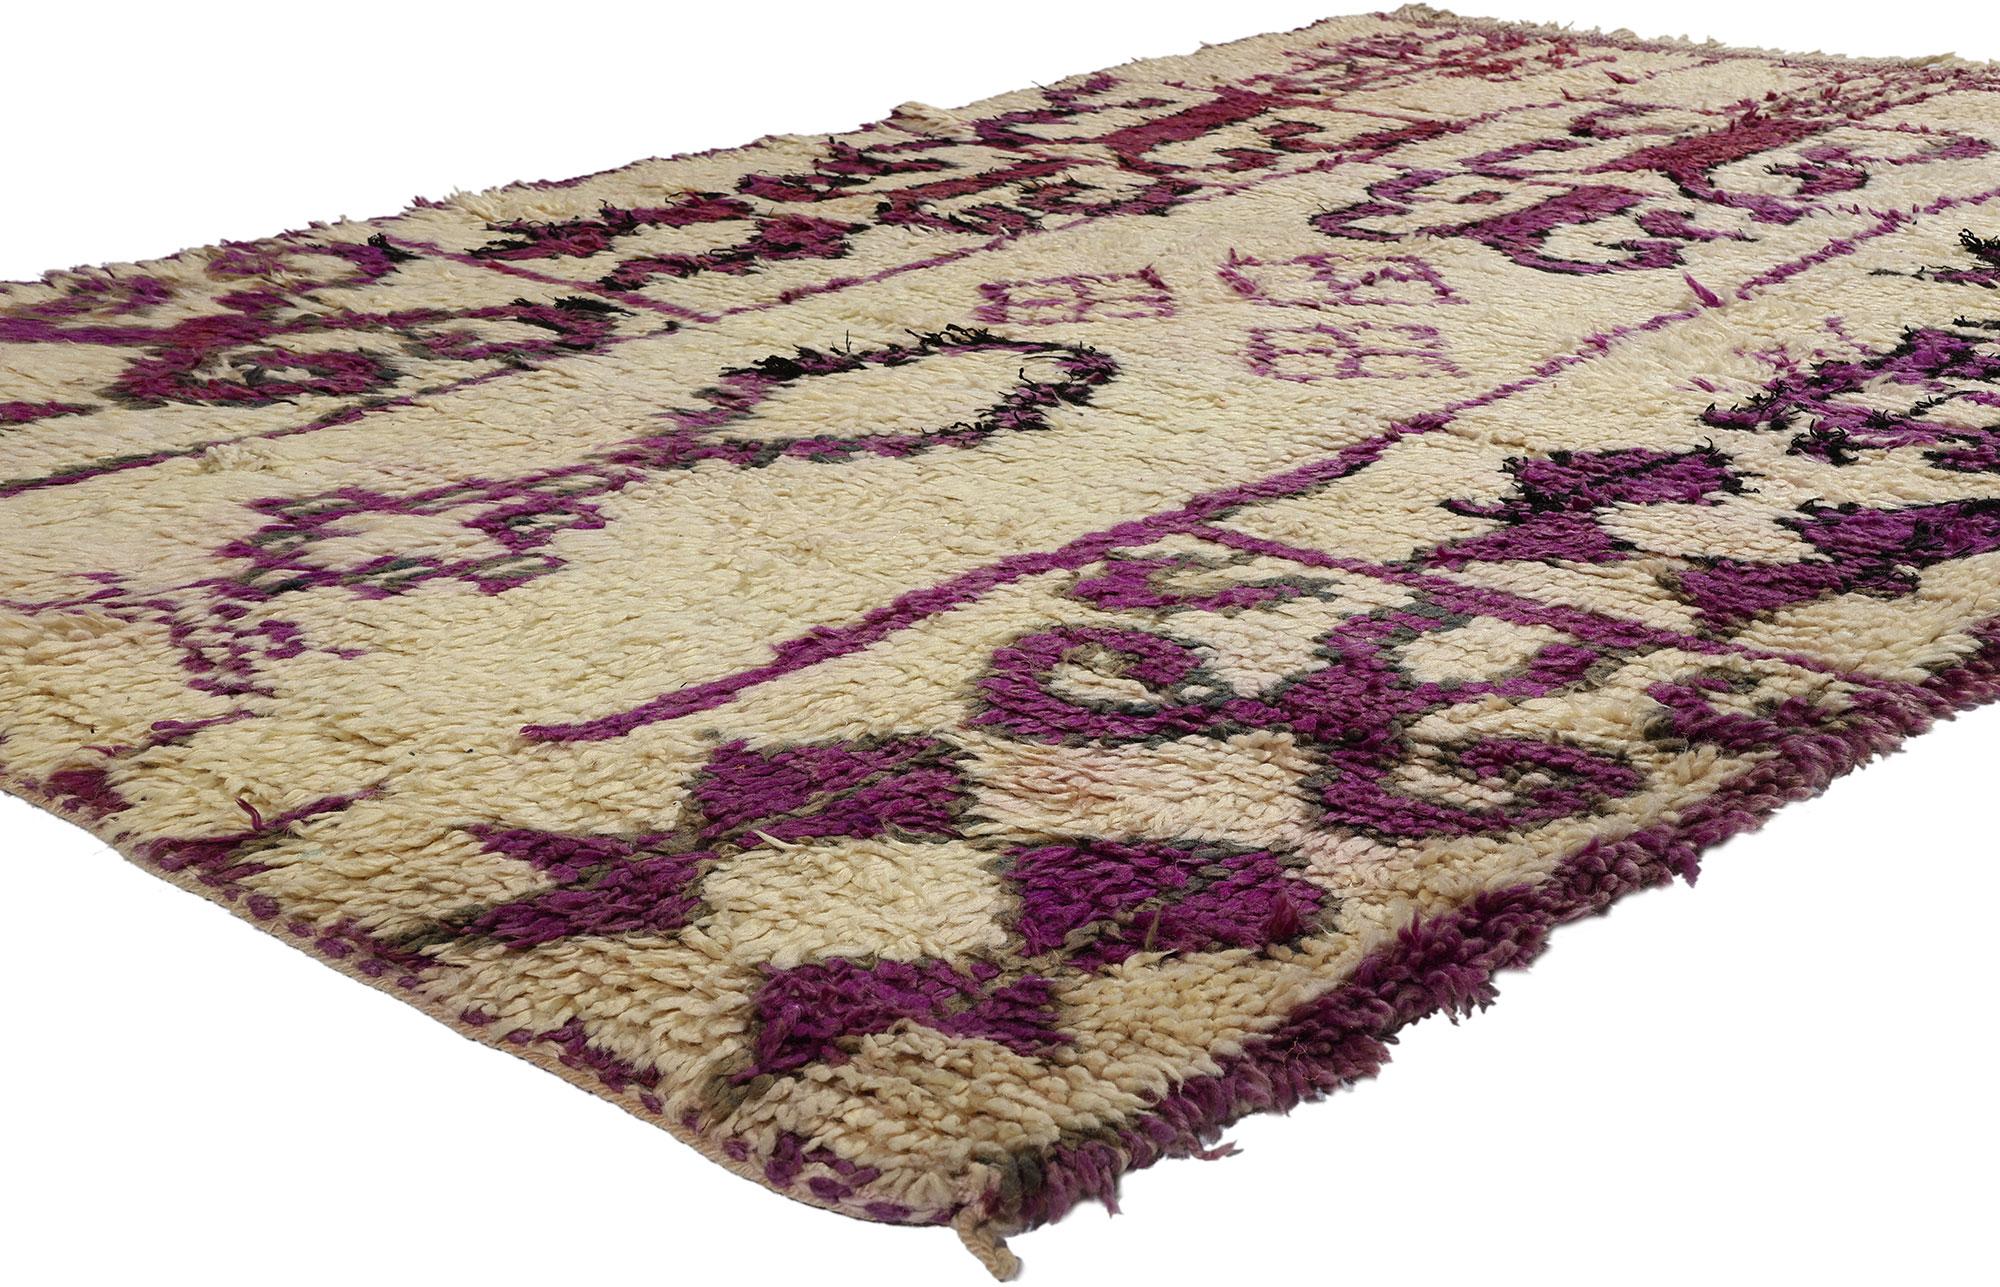 21728 Vintage Moroccan Azilal Rug, 05'02 x 07'10. Enter the vibrant world of Azilal rugs, where every delicate thread weaves a tale spun by skilled artisans amid the dynamic landscapes of central Morocco and the majestic High Atlas Mountains.